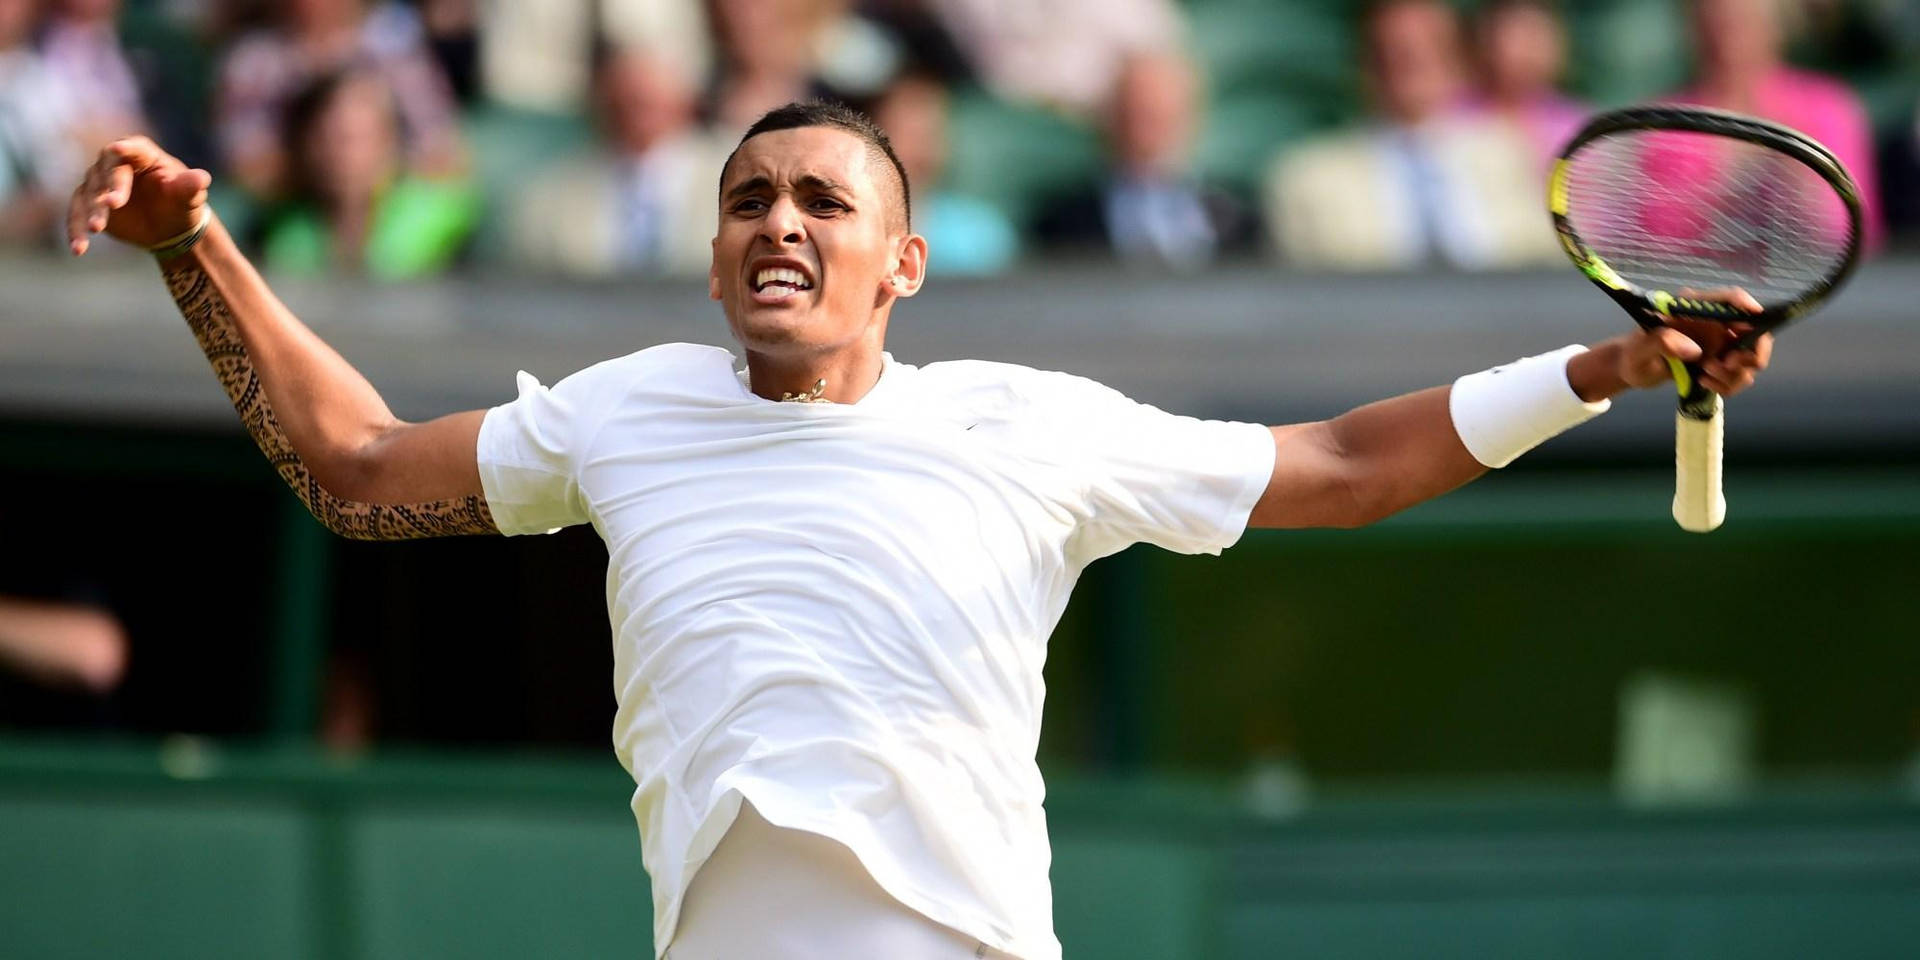 Nick Kyrgios Professional Tennis Player Background